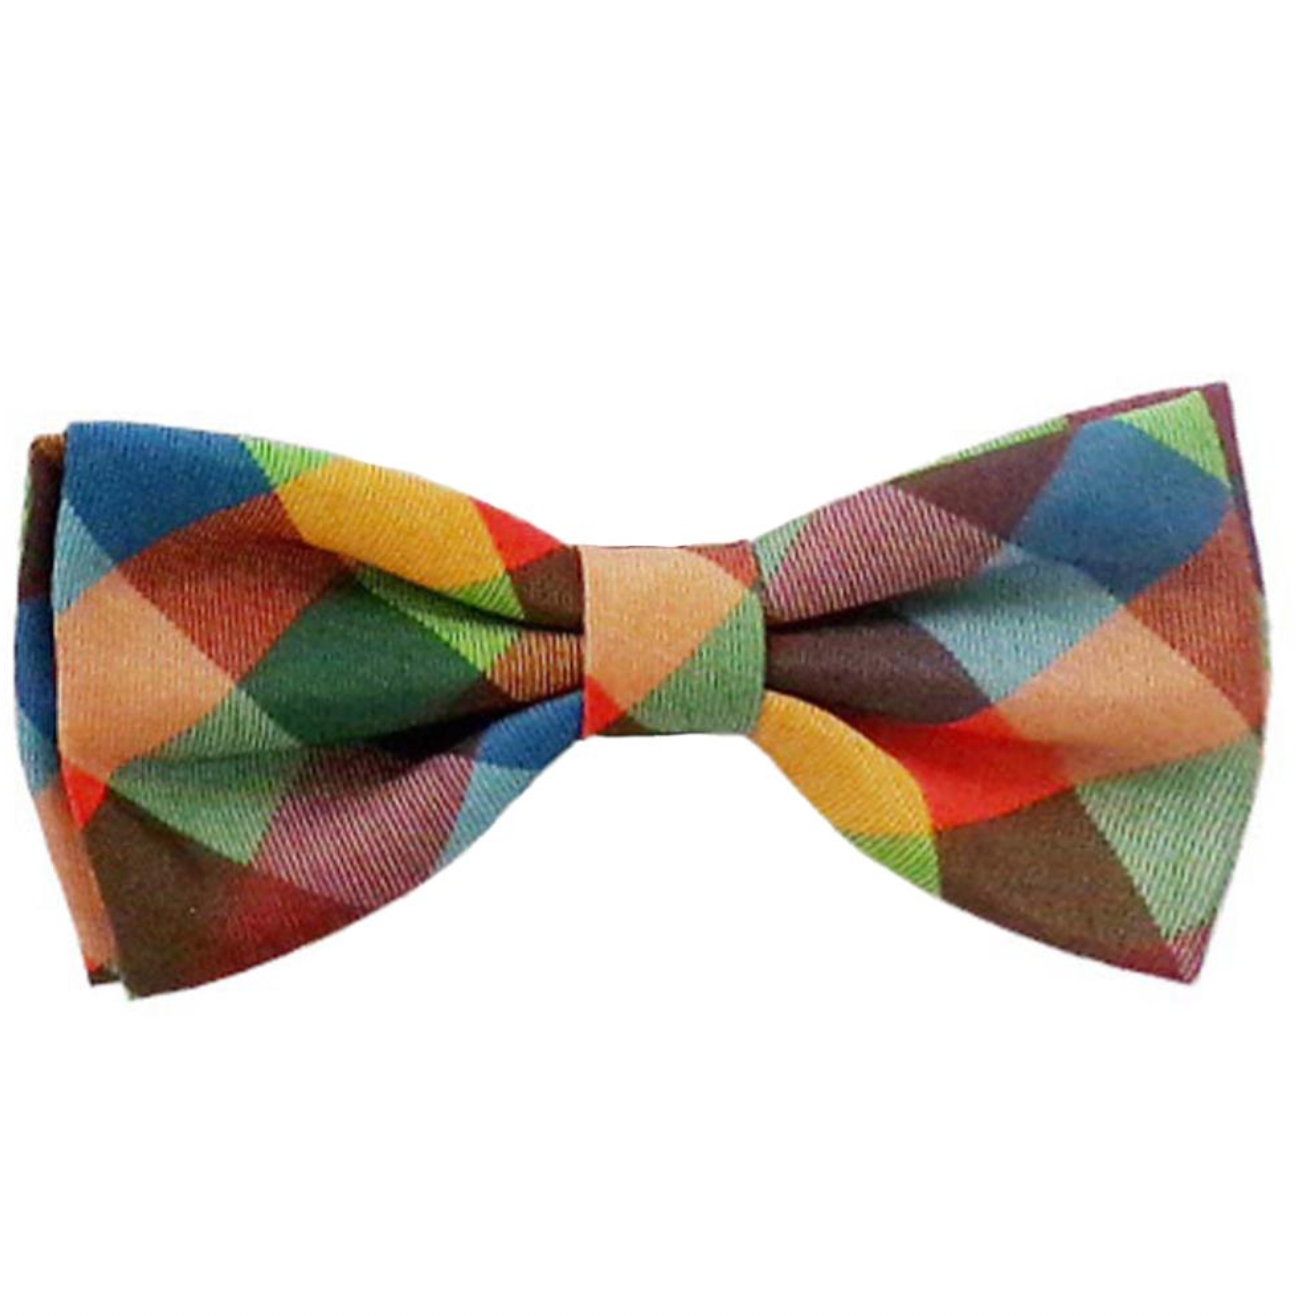 Fall Check Bow Tie.